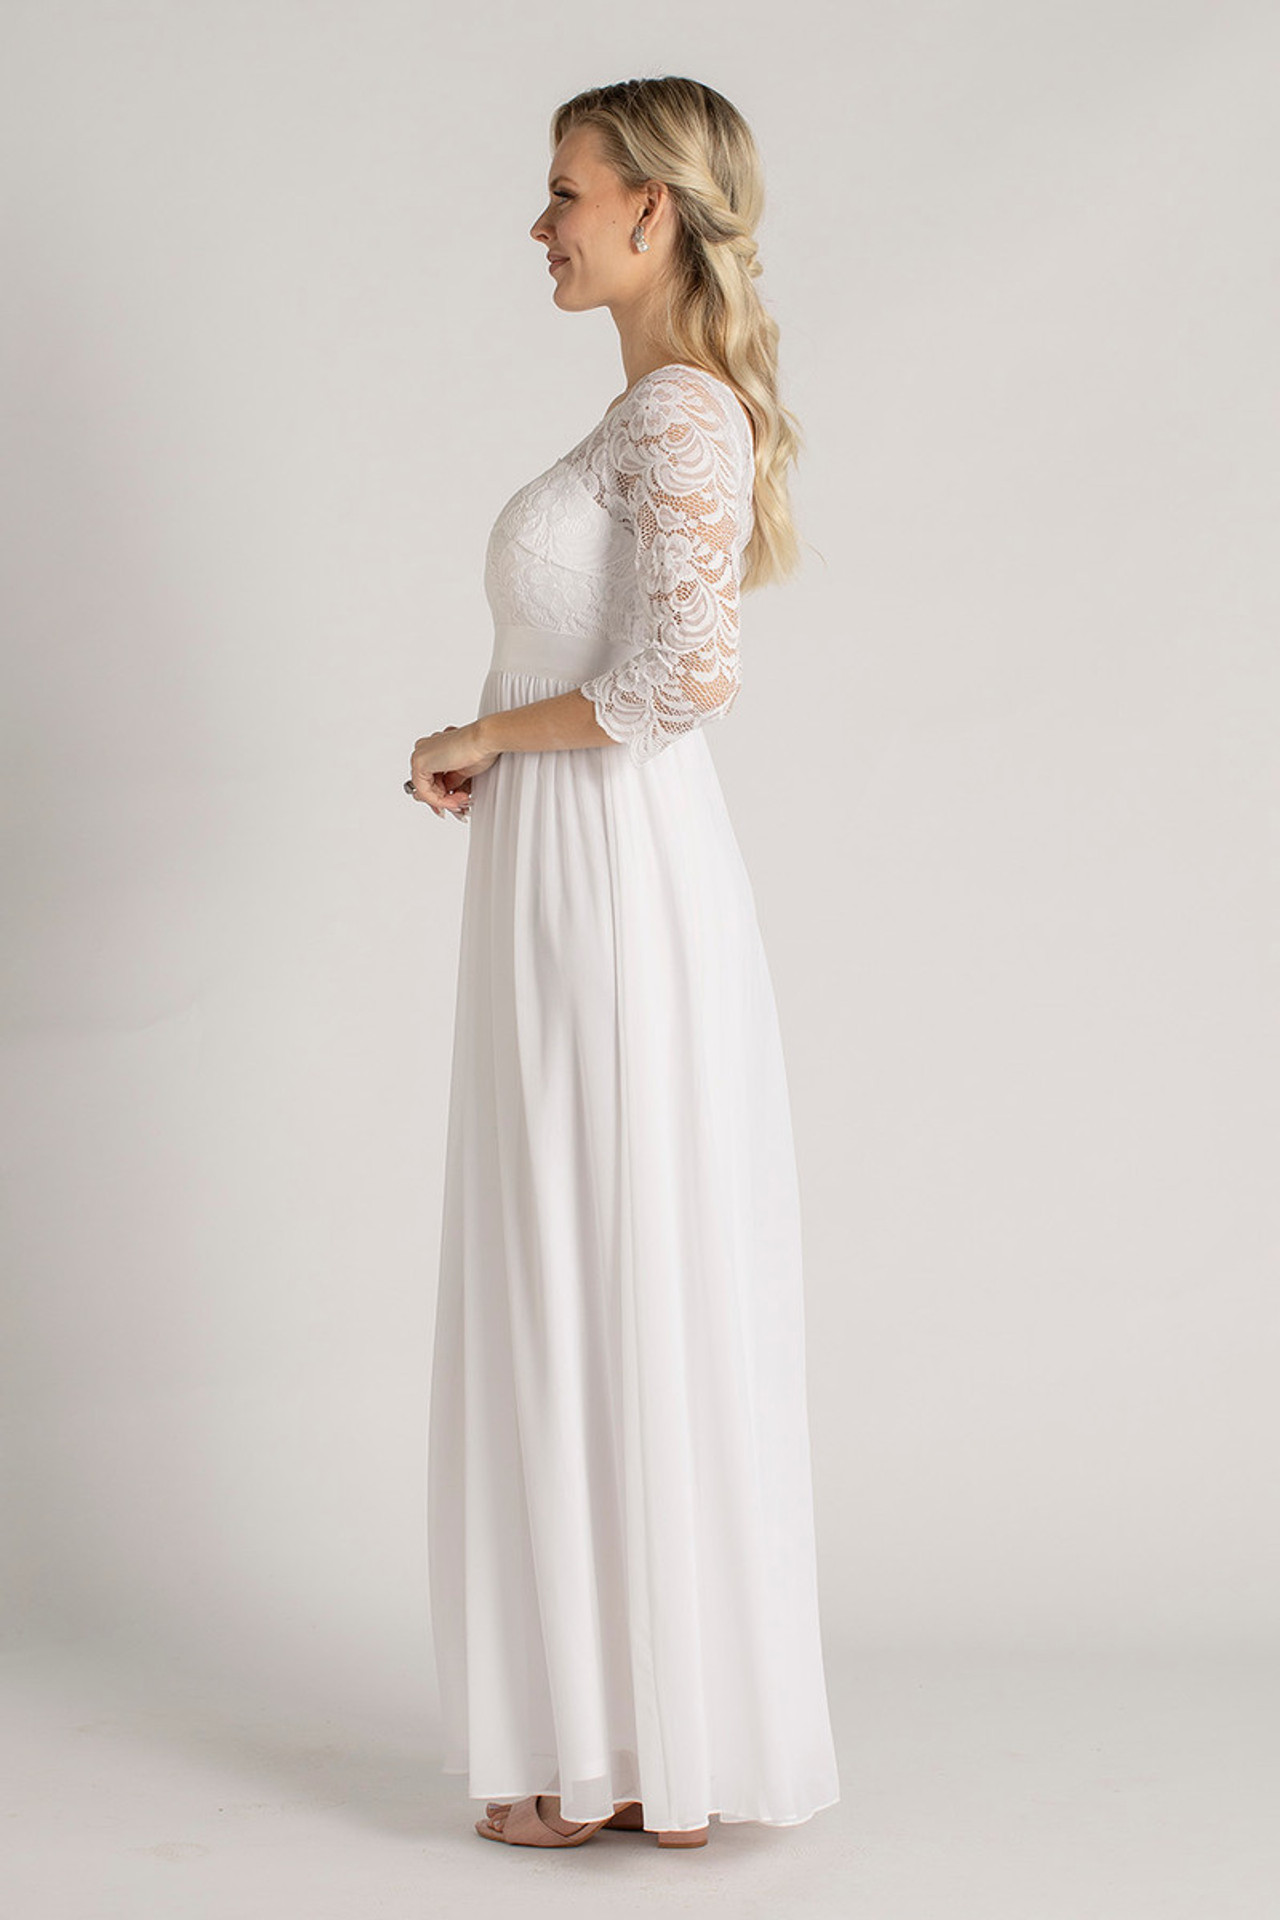 Josephine Lace Sleeved Bridesmaid Dress in White